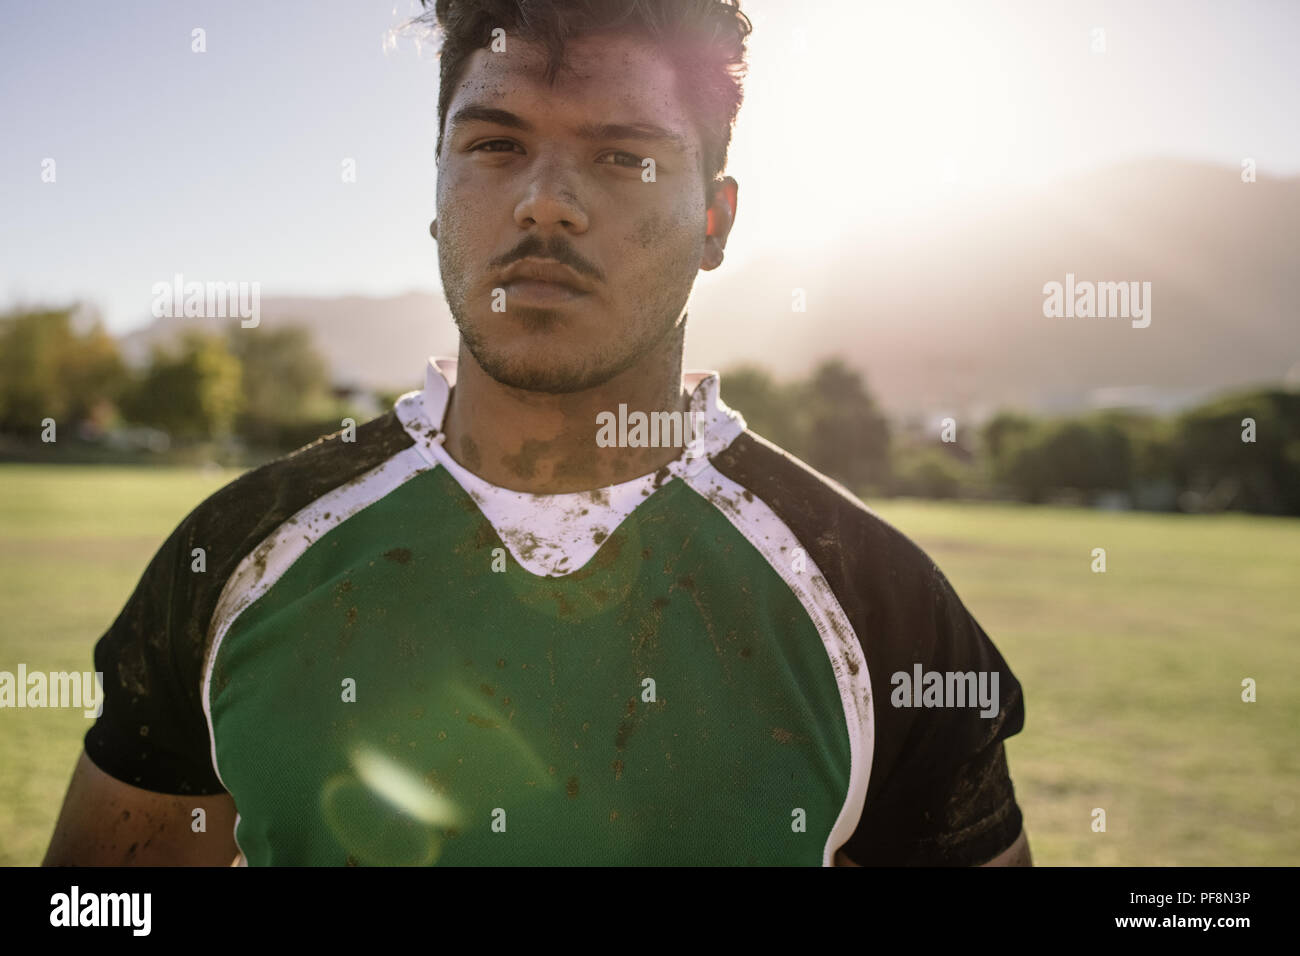 Rugby player on the sports field. Young sportsman with face and  uniform smeared in mud with bright sunlight. Stock Photo